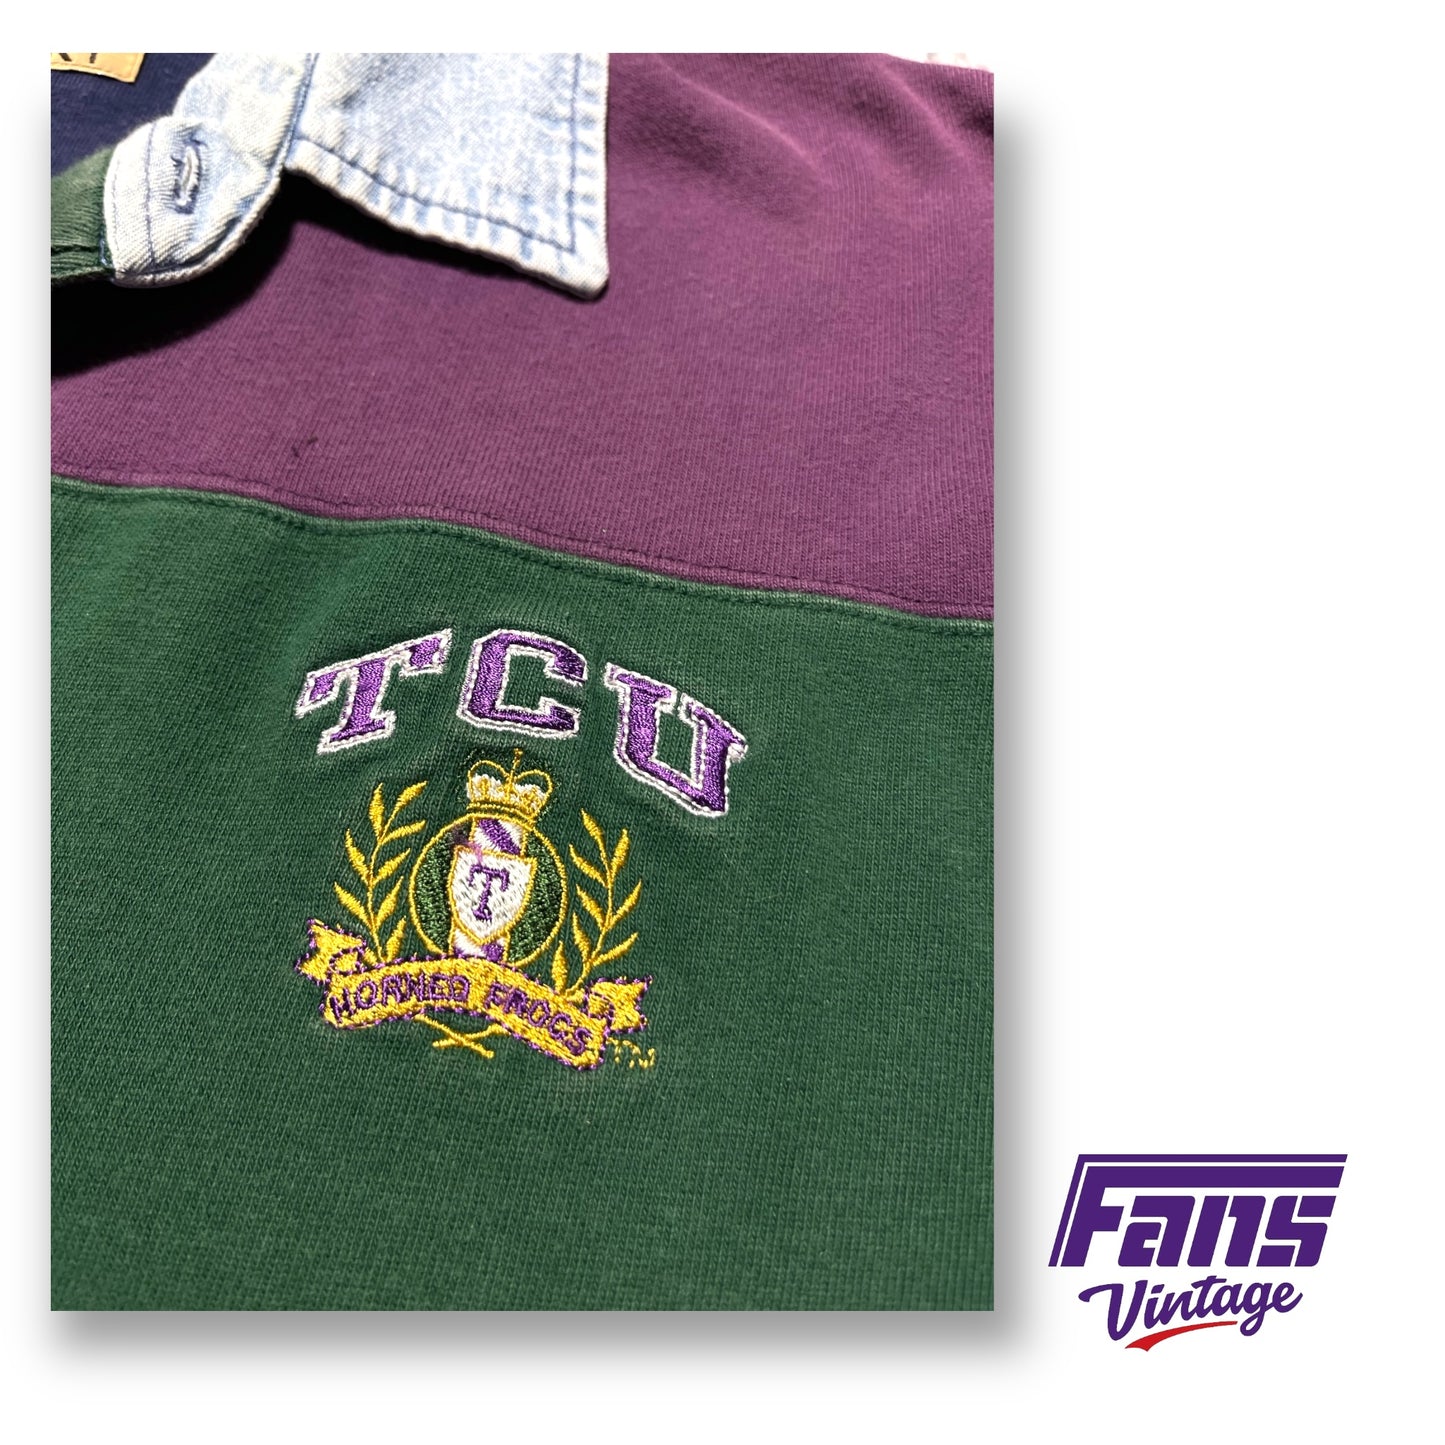 Awesome 90s Vintage TCU Rugby Style Polo